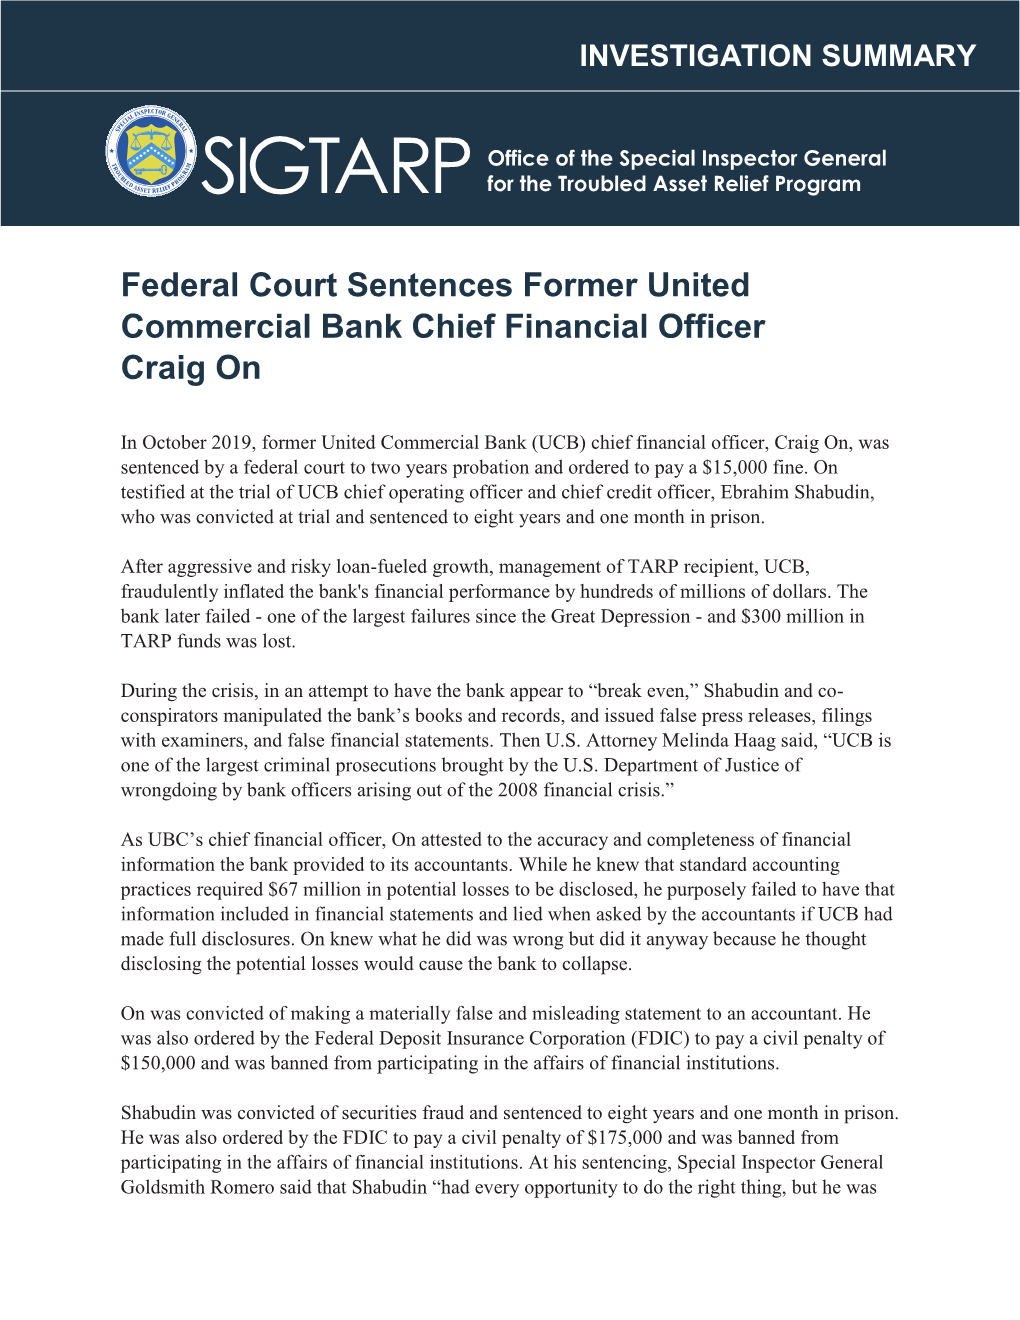 Federal Court Sentences Former United Commercial Bank Chief Financial Officer Craig On